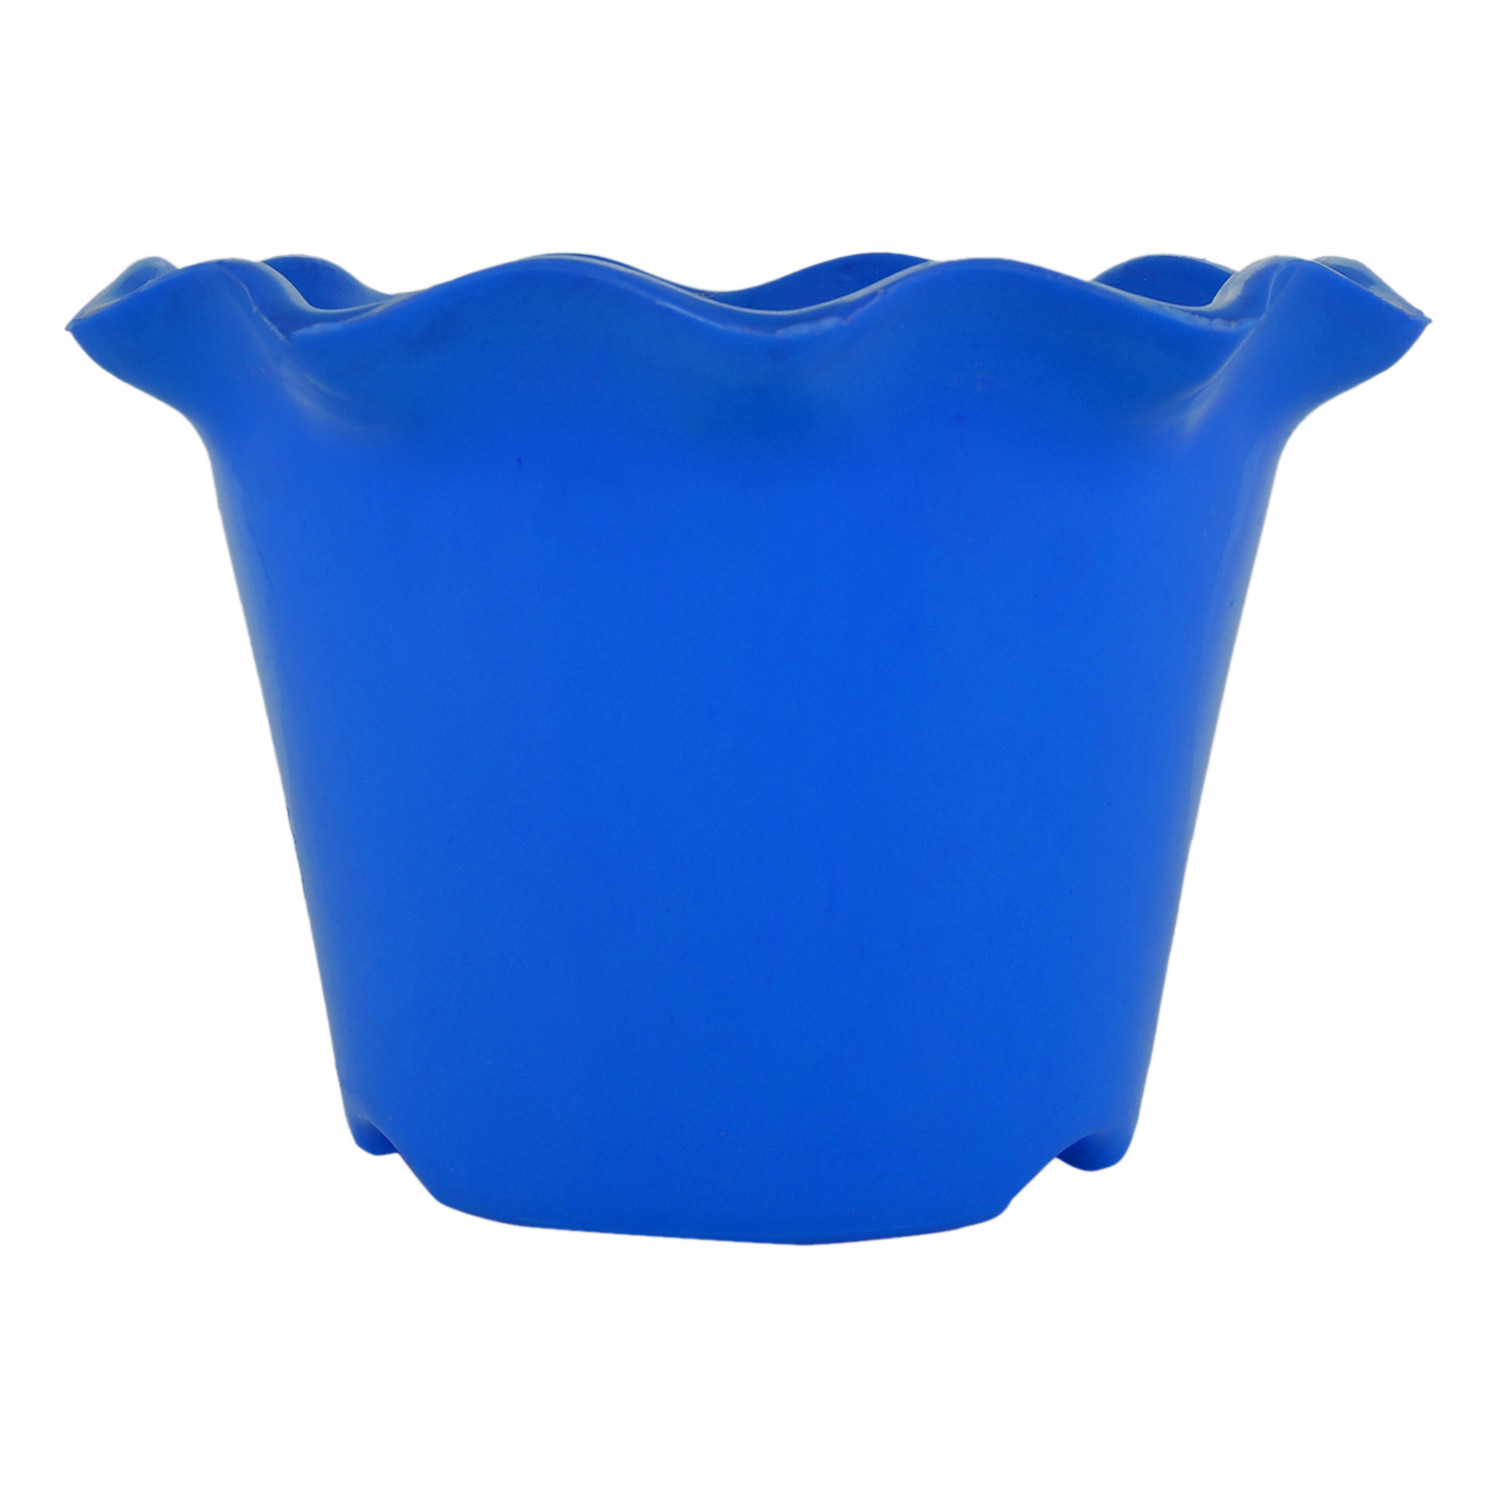 Kuber Industries Blossom Flower Pot|Durable Plastic Flower Pot|Gamla With Drain Holes for Home Décor|Balcony|Garden|8 Inch (Blue)